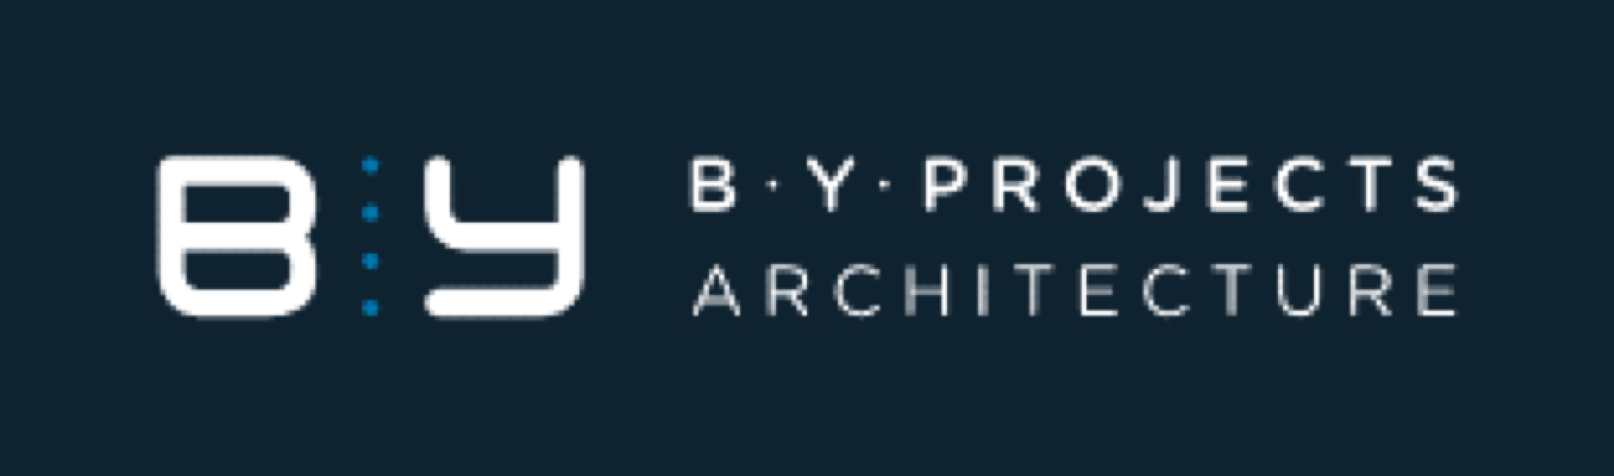 BYP Architecture Logo